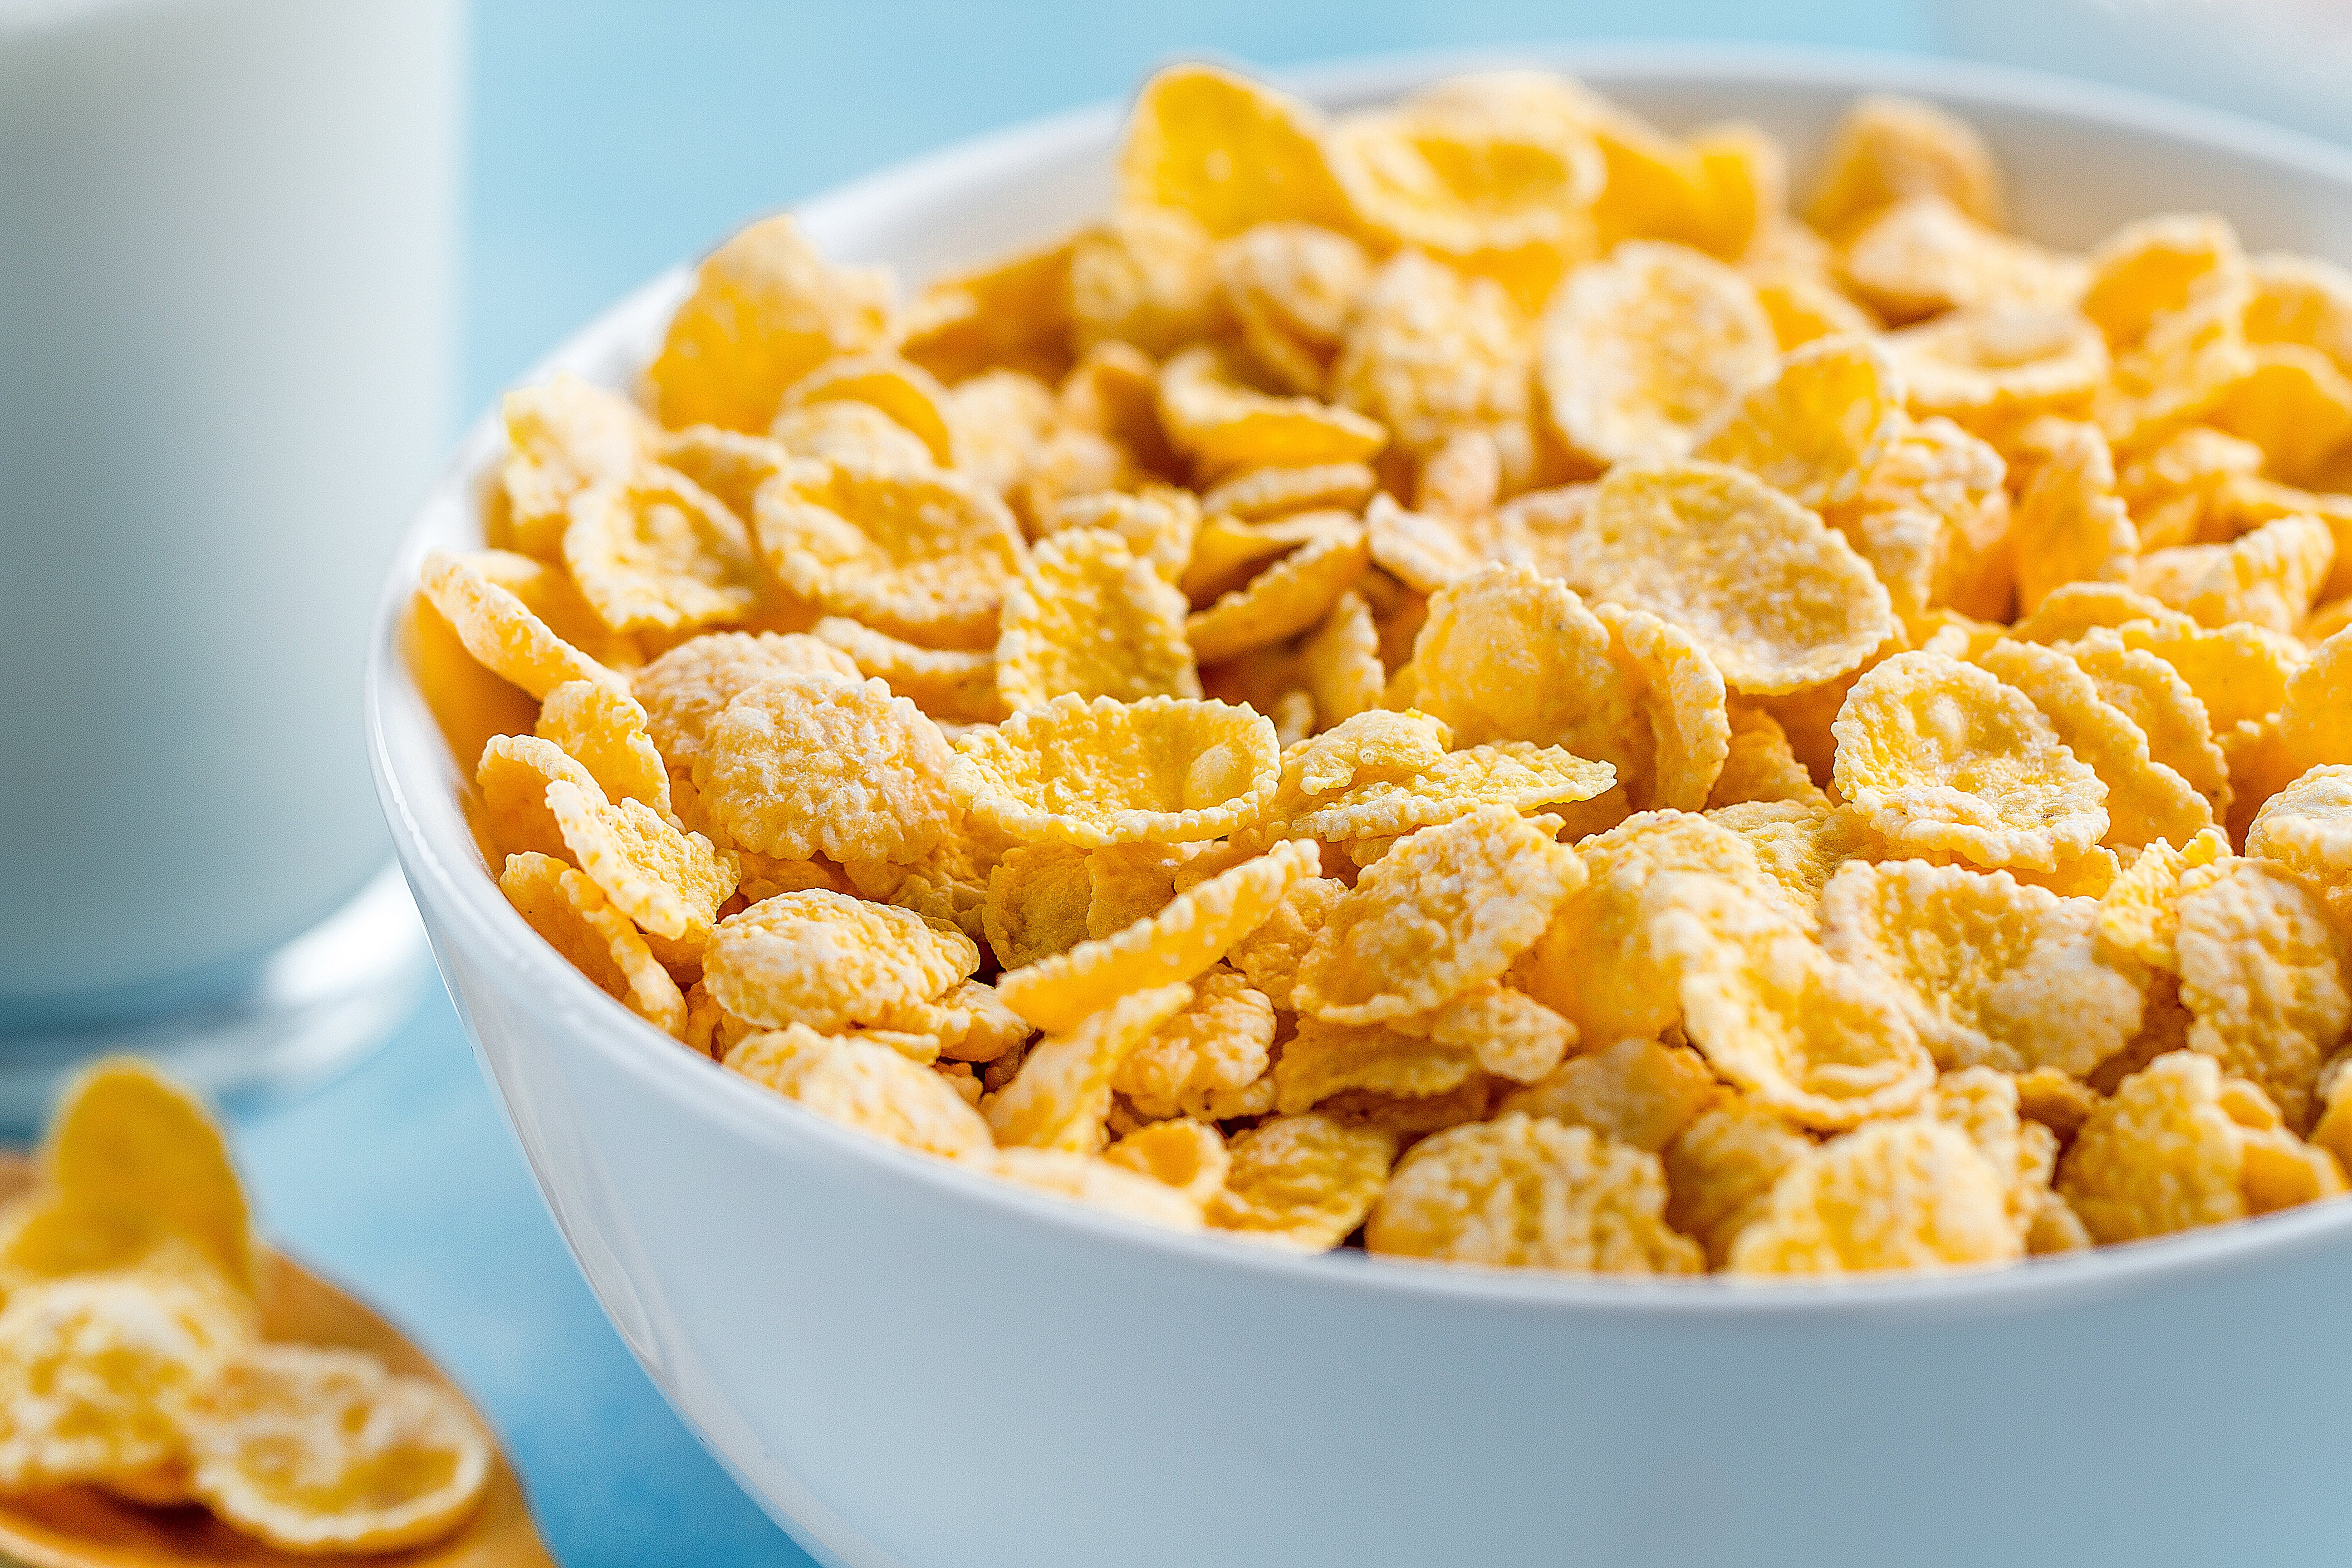 Is Cornflakes Healthy? The Truth Behind the Popular Breakfast Cereal